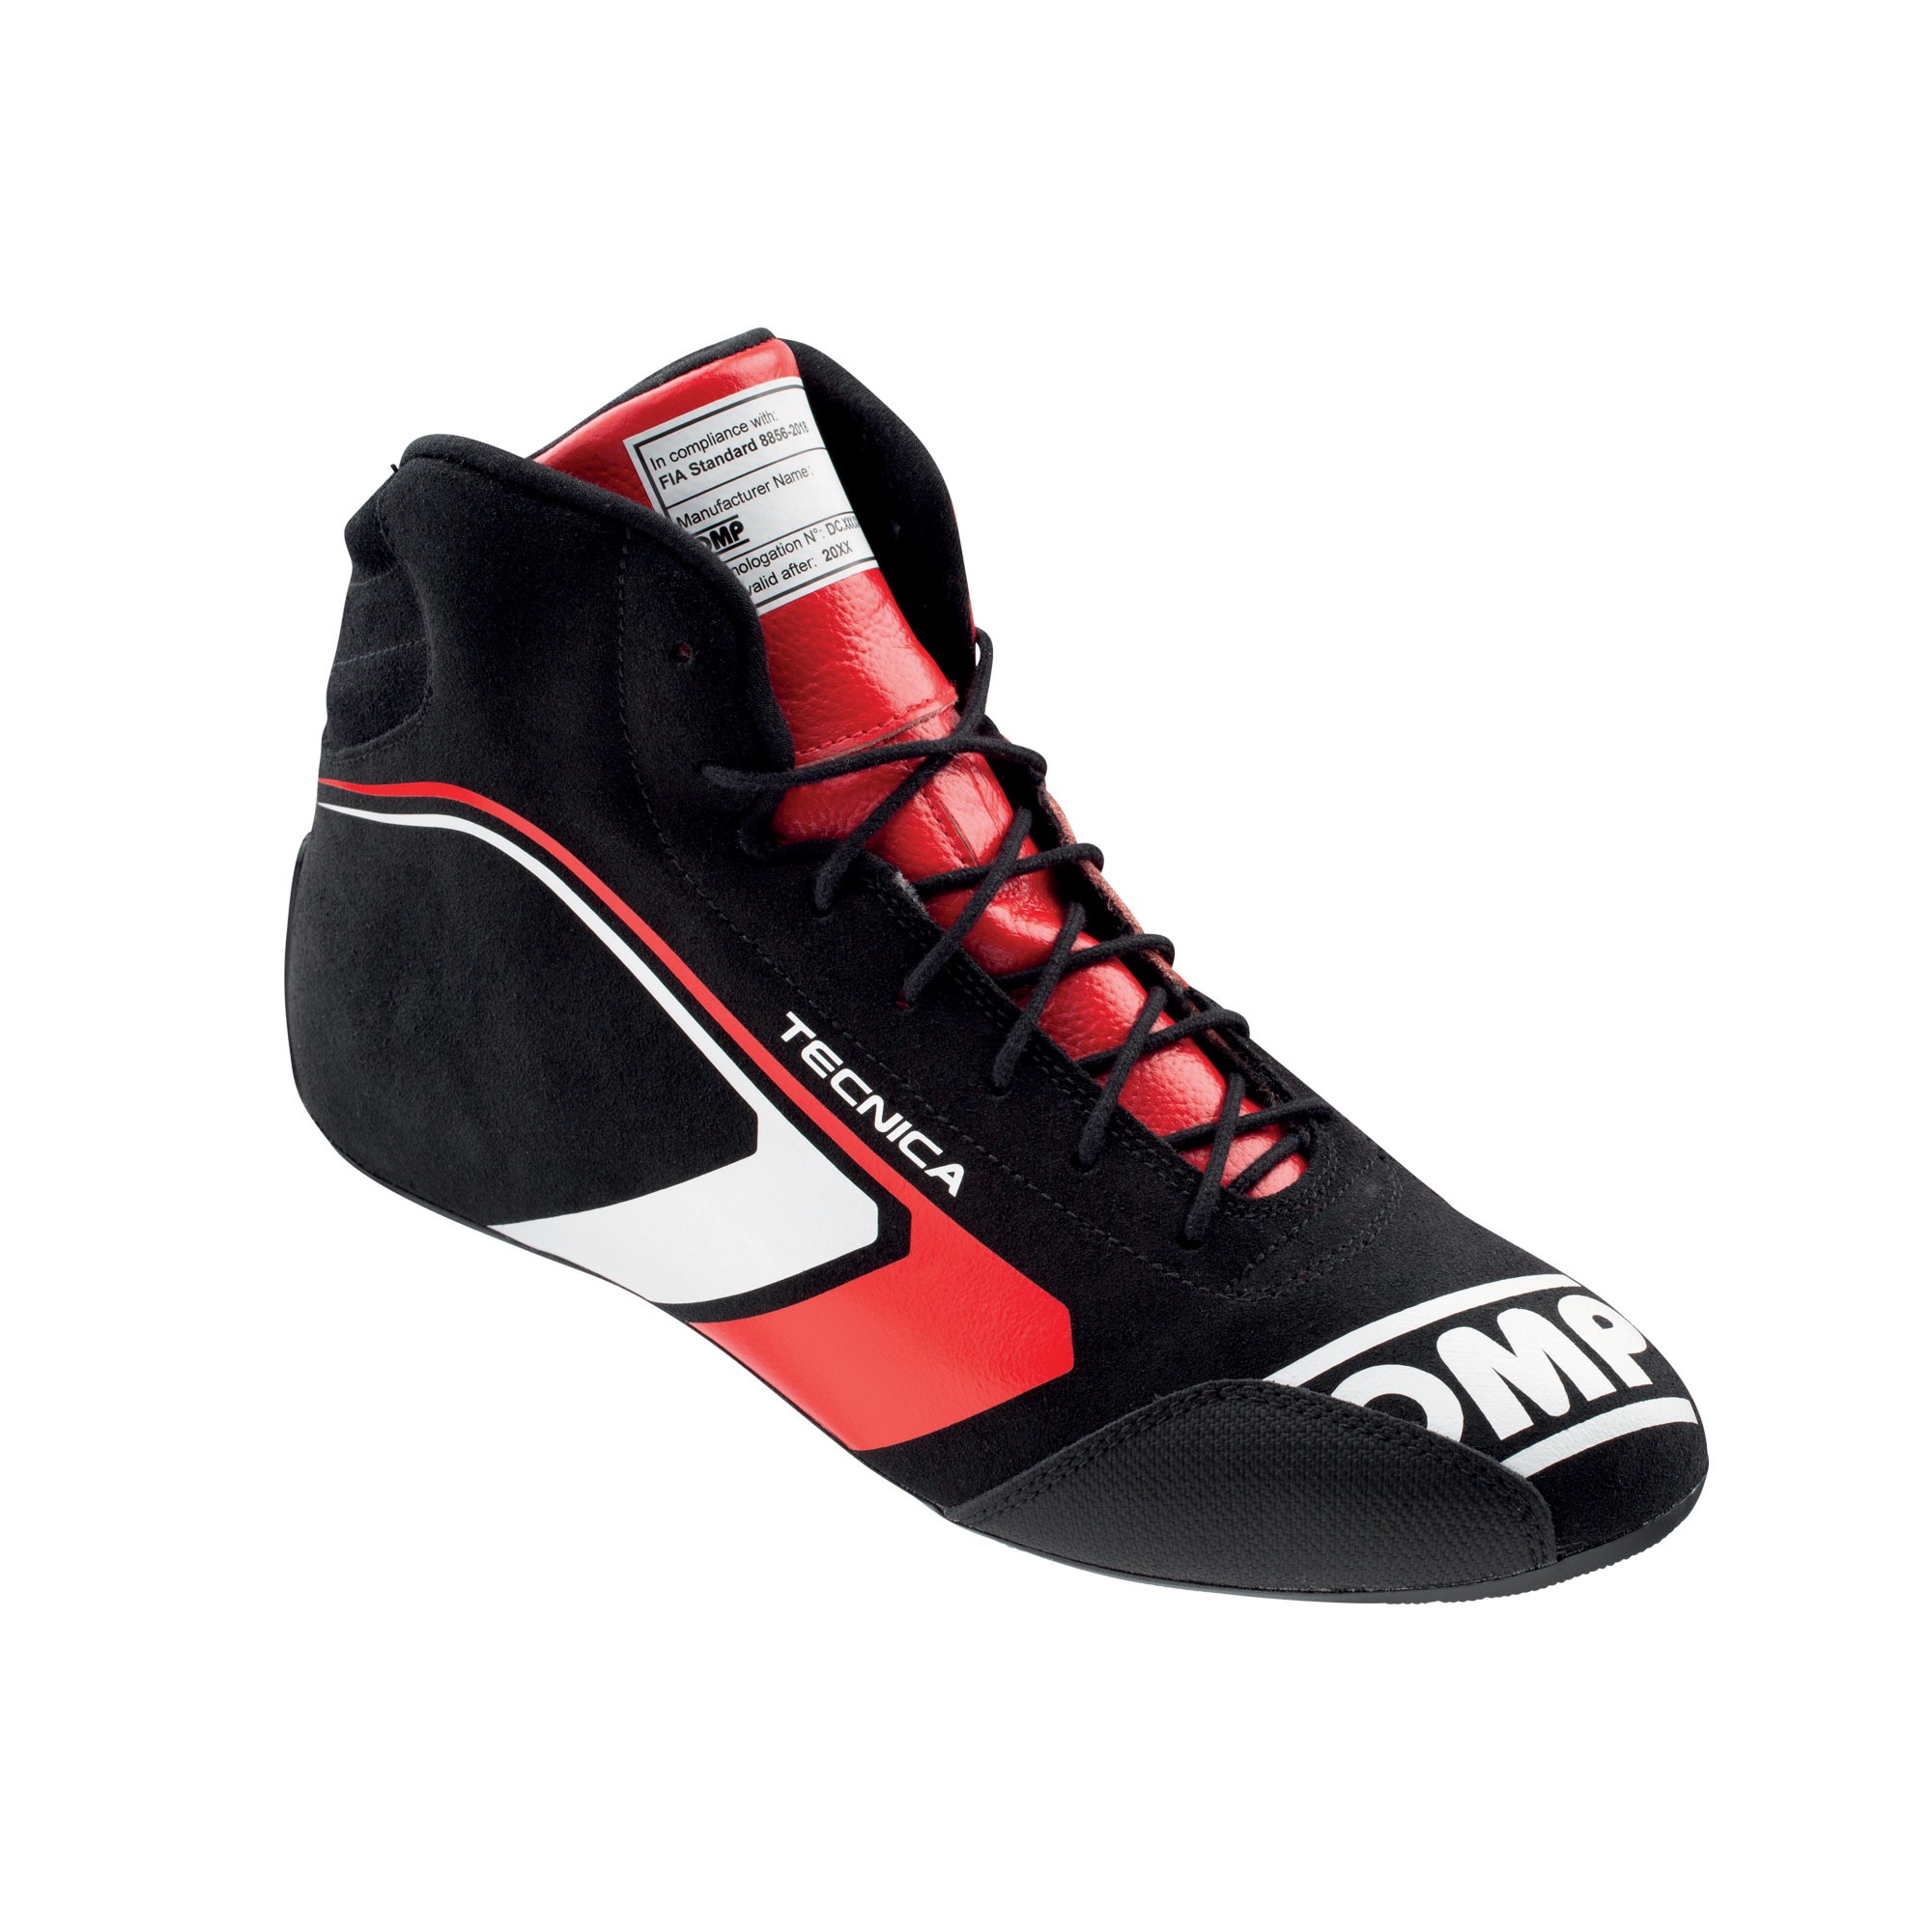 TECNICA Shoes my2021